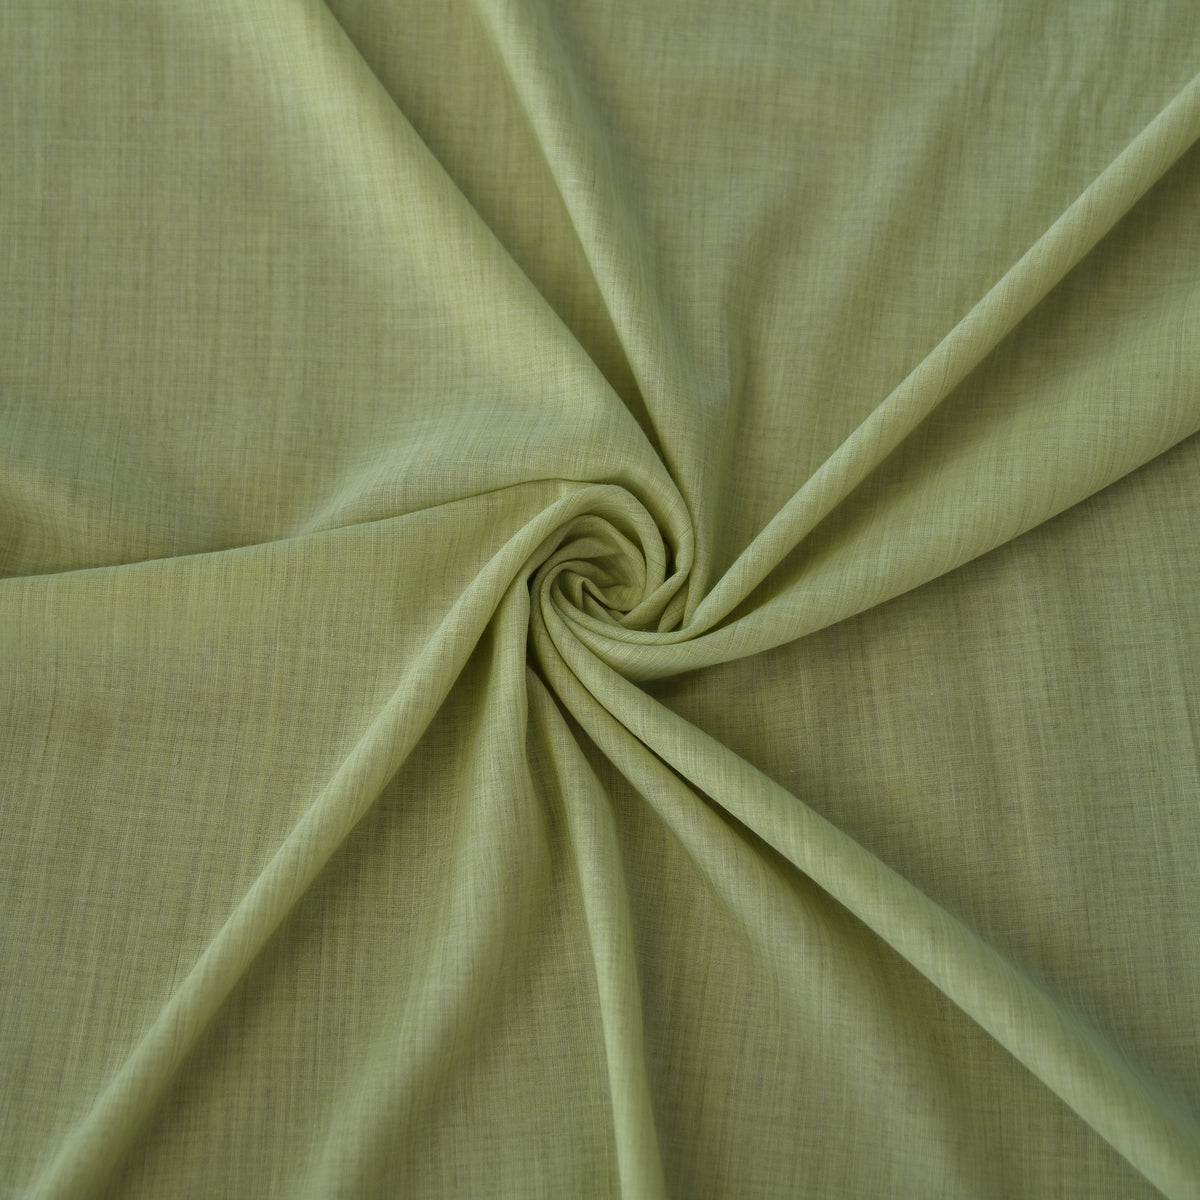 Day curtain delicate green Kalle